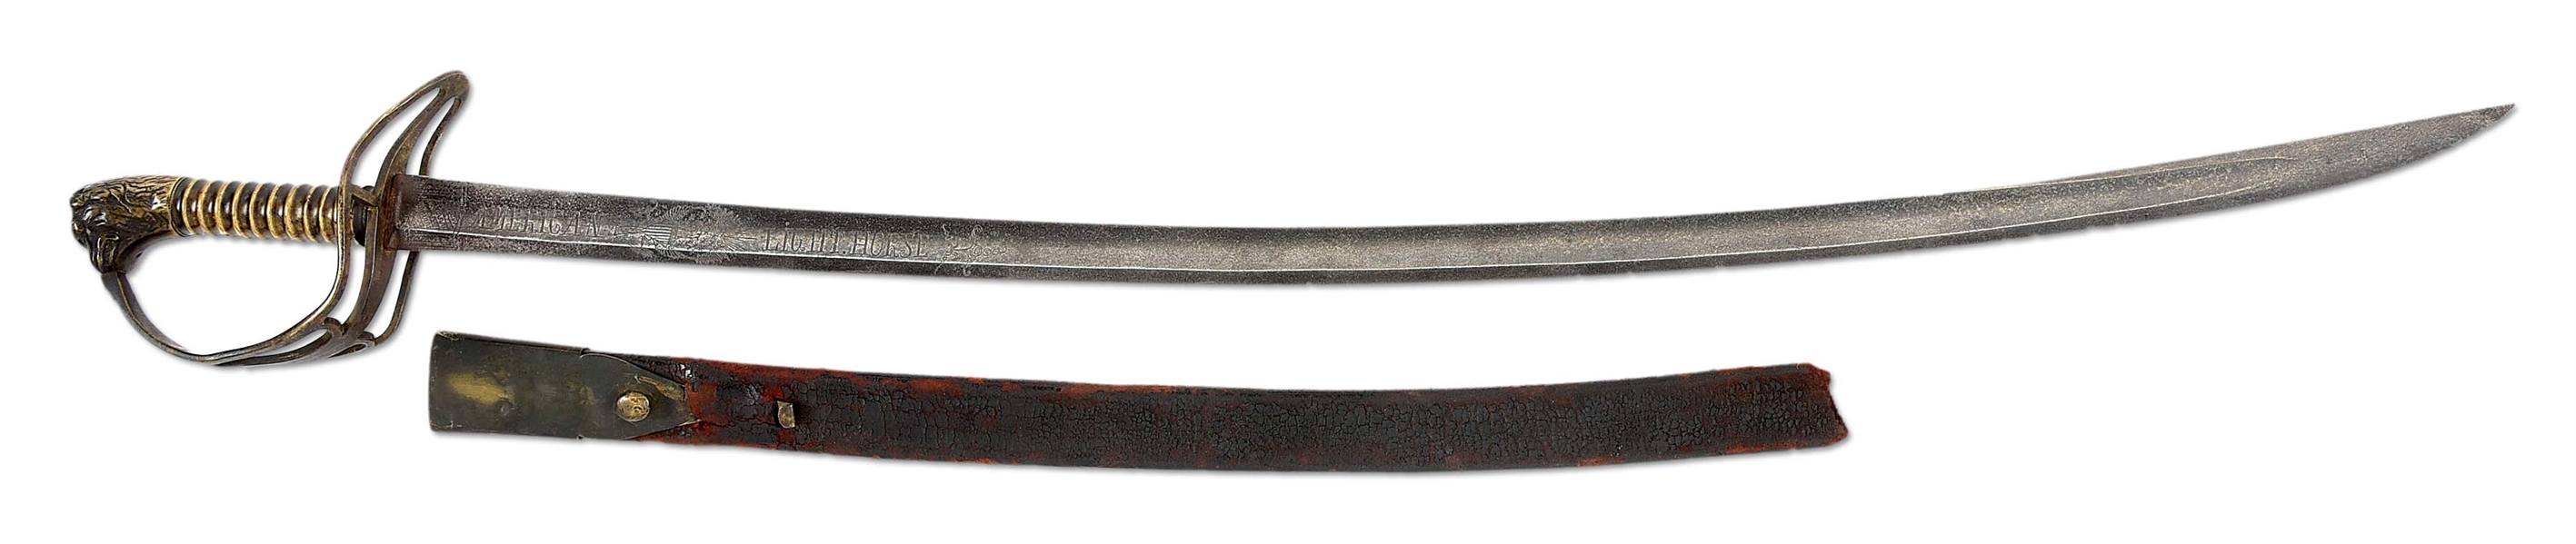 BRASS MOUNTED "AMERICAN LIGHT HORSE" INSCRIBED CAVALRY SABER WITH PARTIAL SCABBARD.